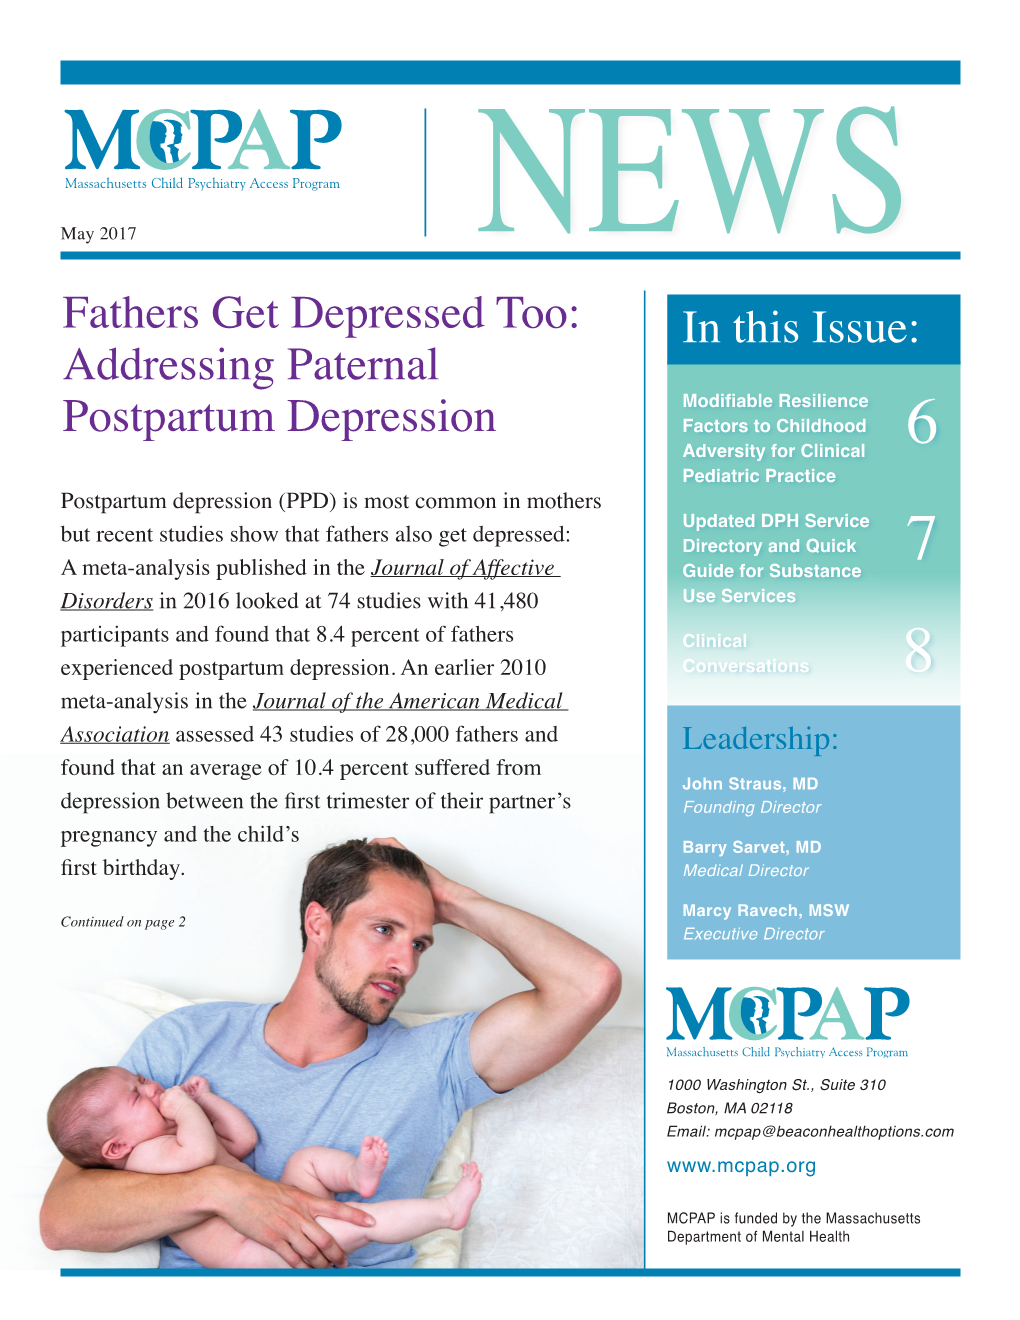 Fathers Get Depressed Too: Addressing Paternal Postpartum Depression in This Issue